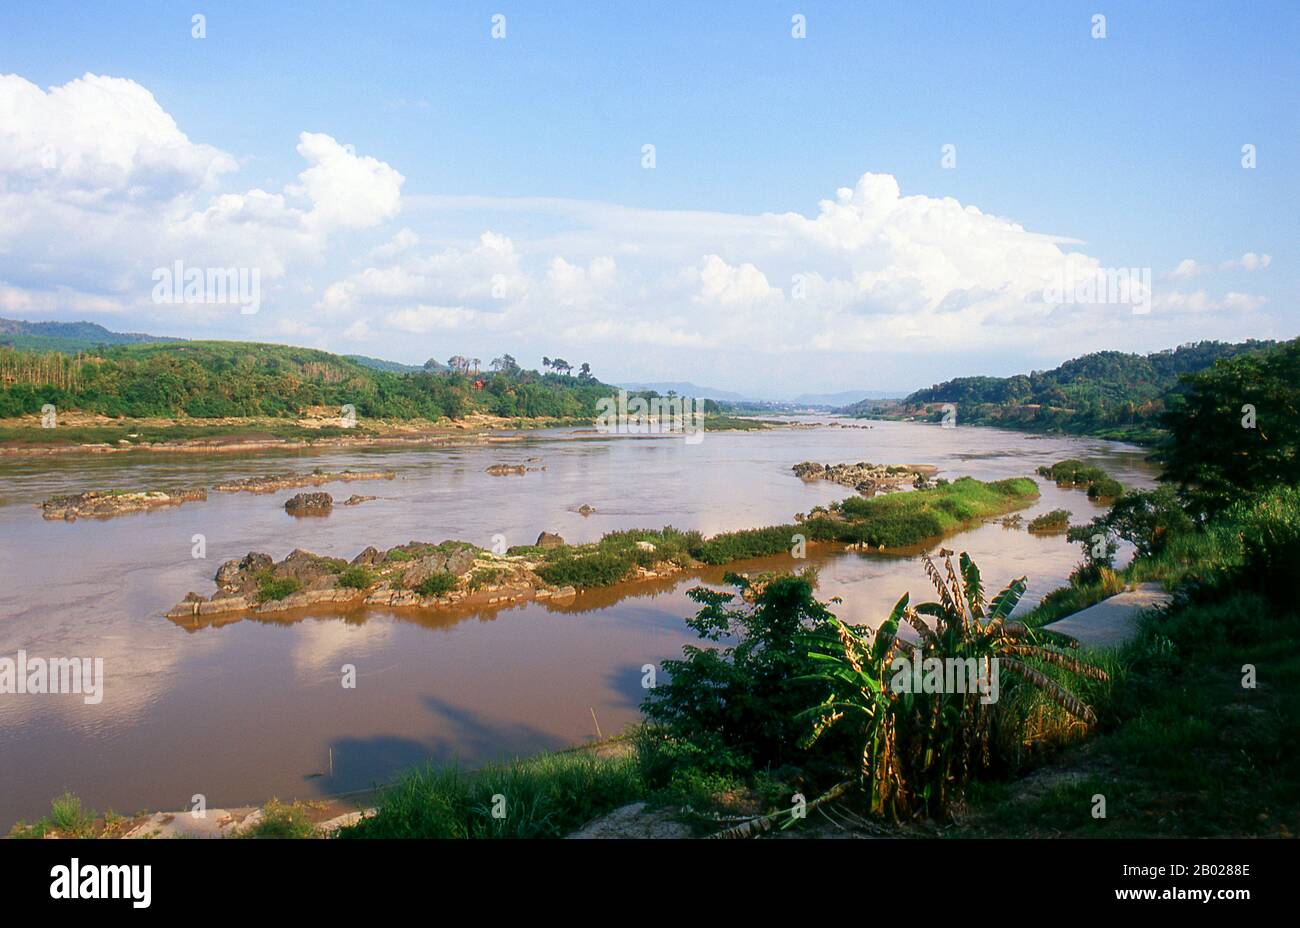 The Mekong is the world's 10th-longest river and the 7th-longest in Asia. Its estimated length is 4,909 km (3,050 mi)  and it drains an area of 795,000 km2 (307,000 sq mi), discharging 475 km3 (114 cu mi) of water annually.  From the Tibetan Plateau the Mekong runs through China's Yunnan province, Burma, Laos, Thailand, Cambodia and Vietnam. Stock Photo